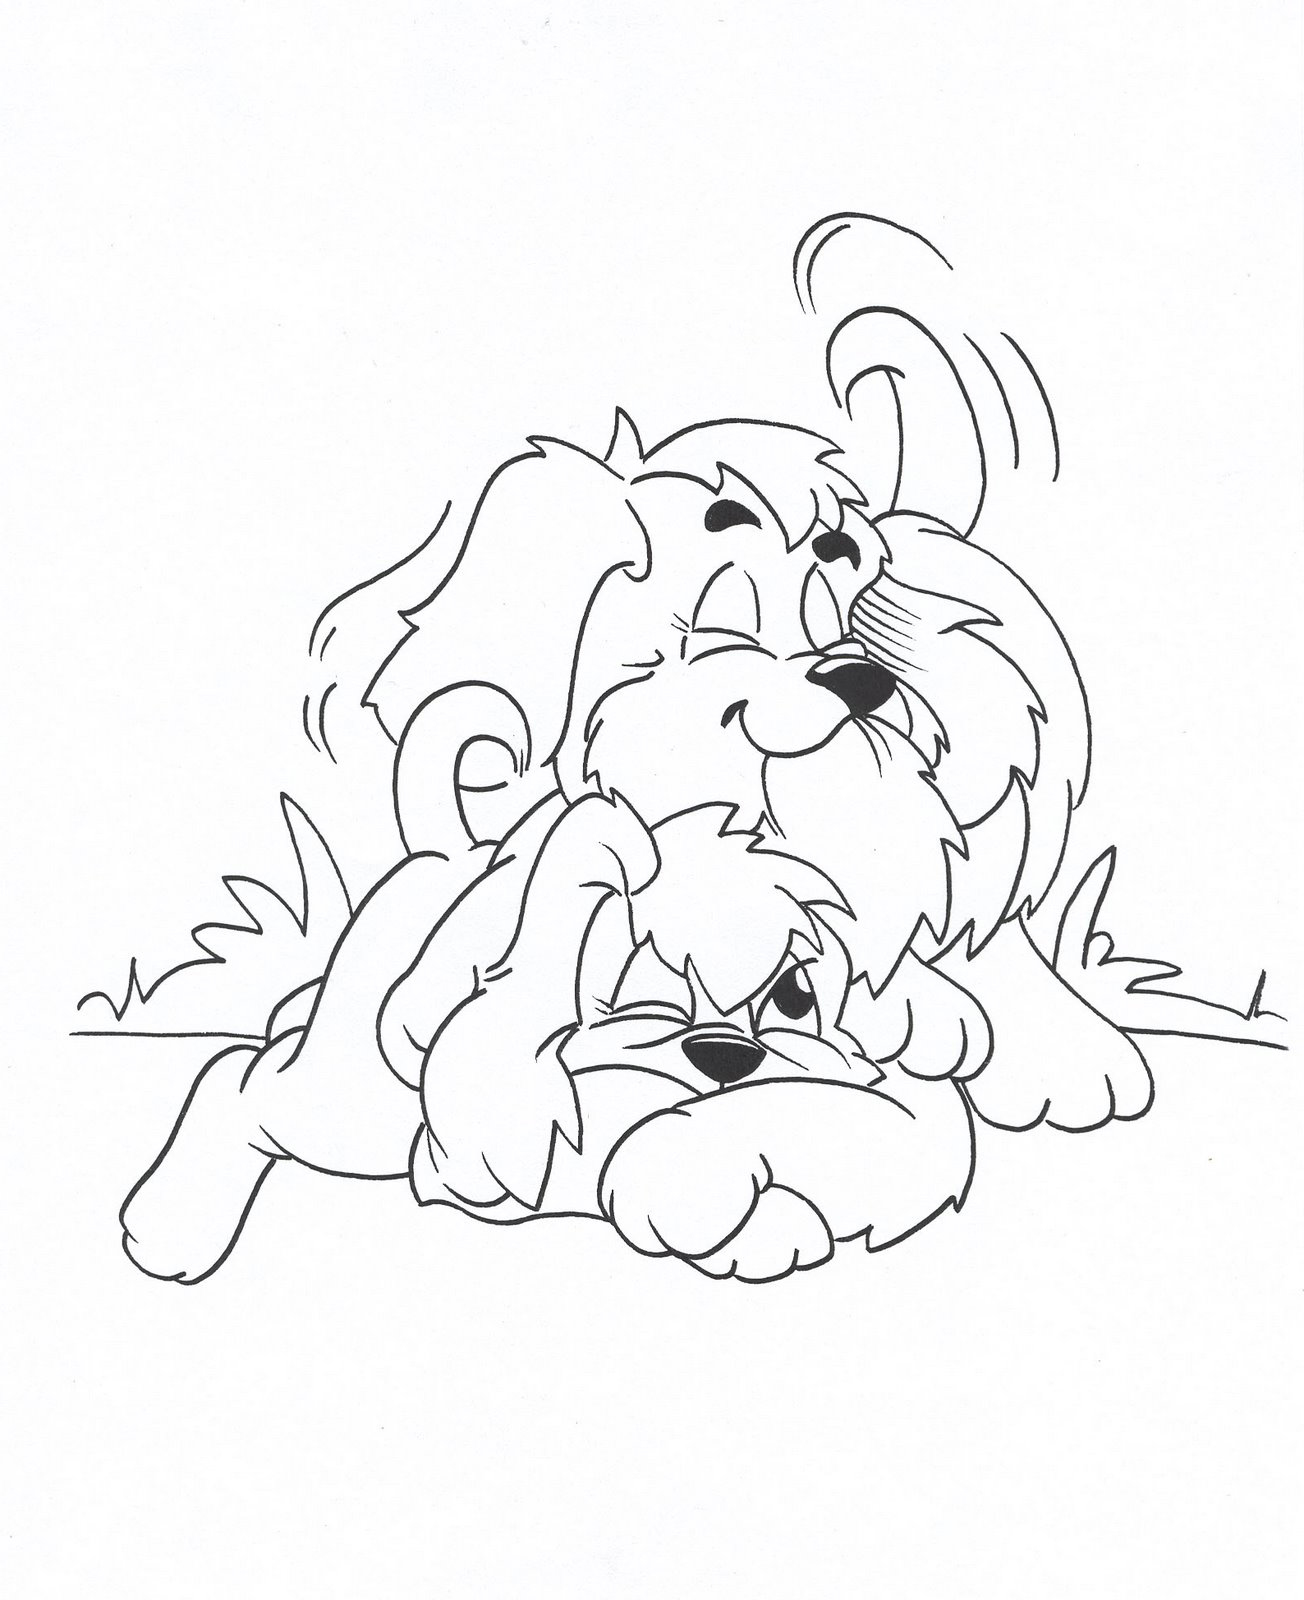 Dogs 2 coloring page